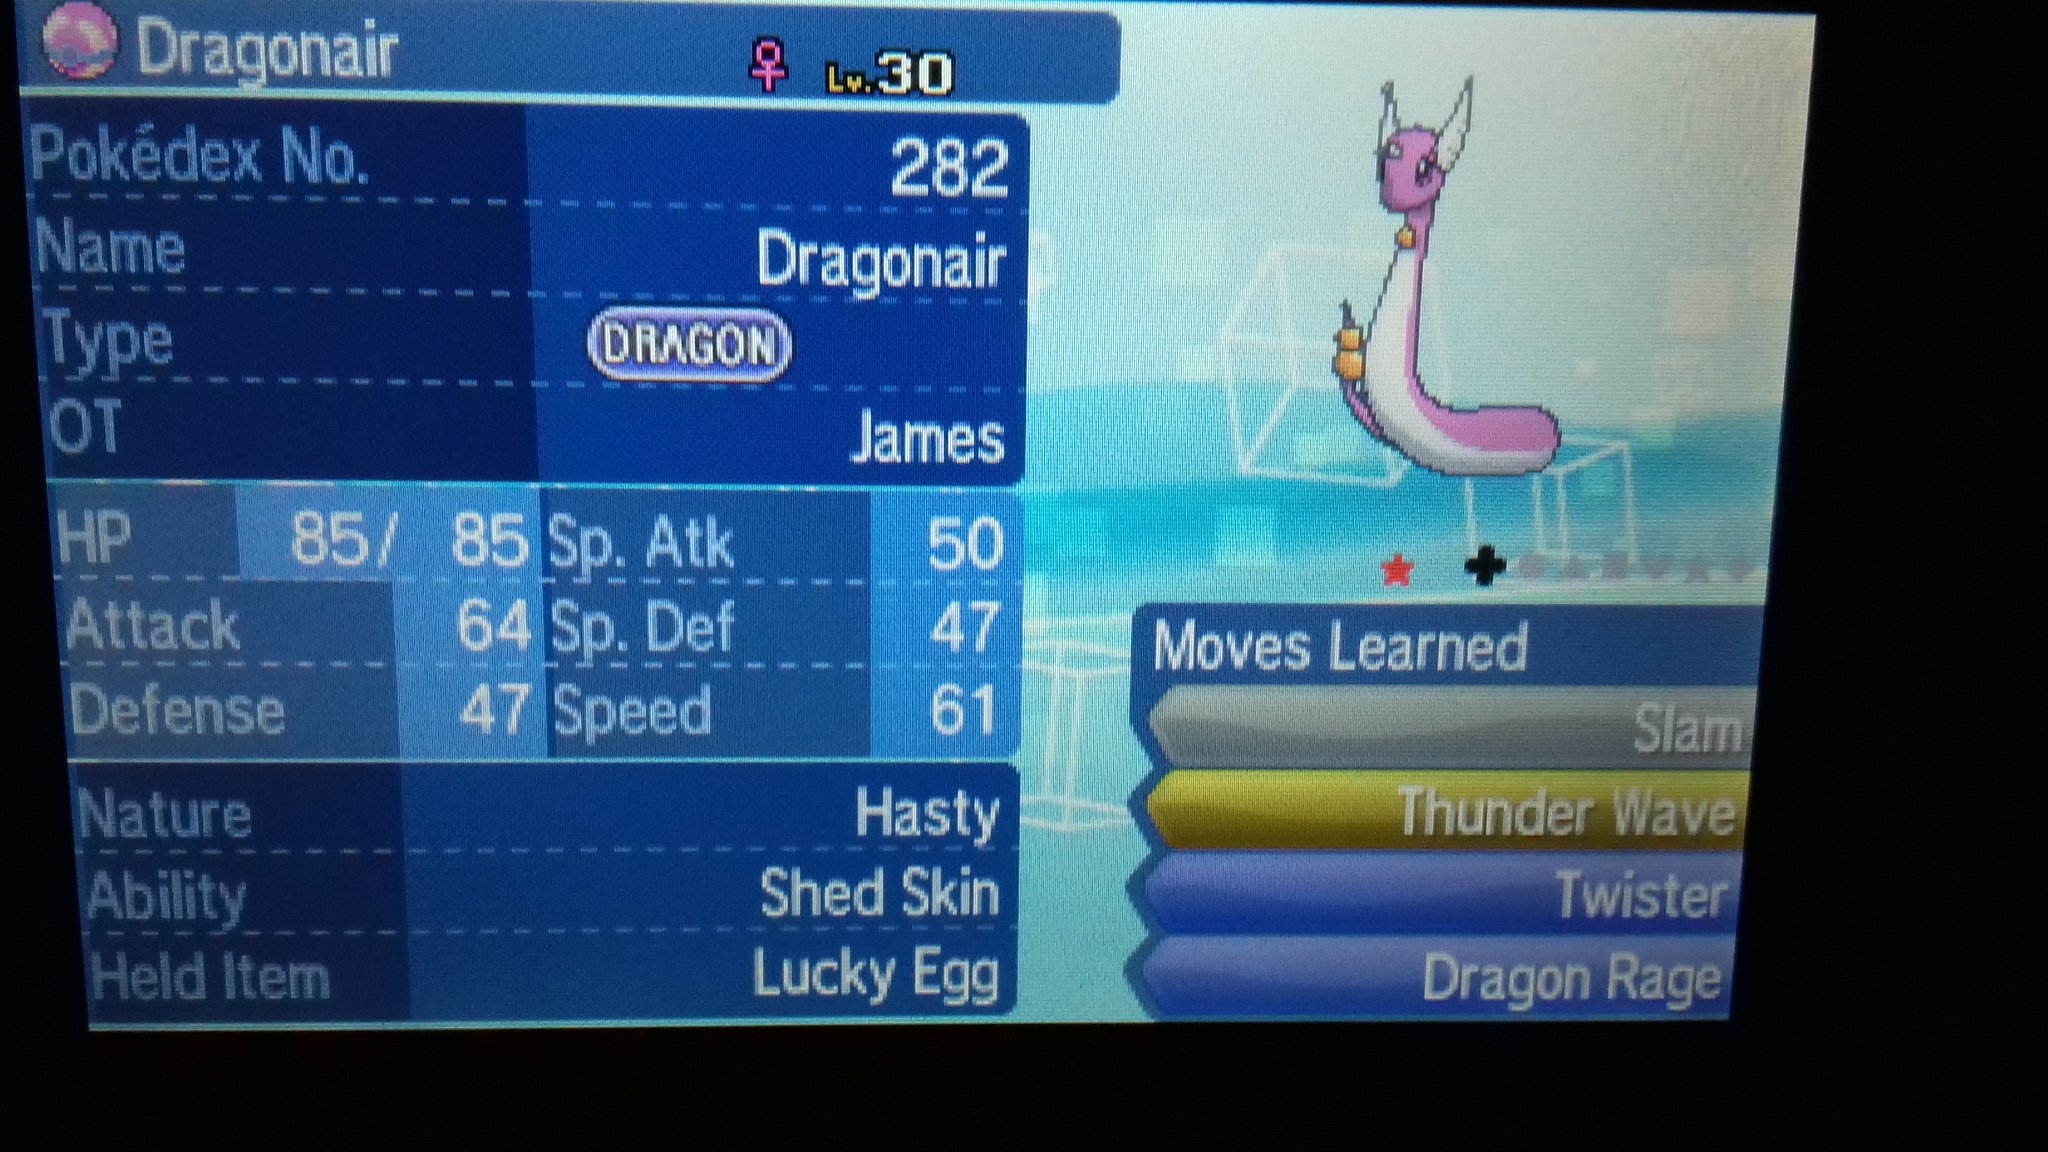 prinnyvsteddie on Twitter: "86 sos for second shiny dratini evolved into dragonair sos hunt the last few pokemon will be egg hunt then i'll have all pokemon shiny in the aloladex